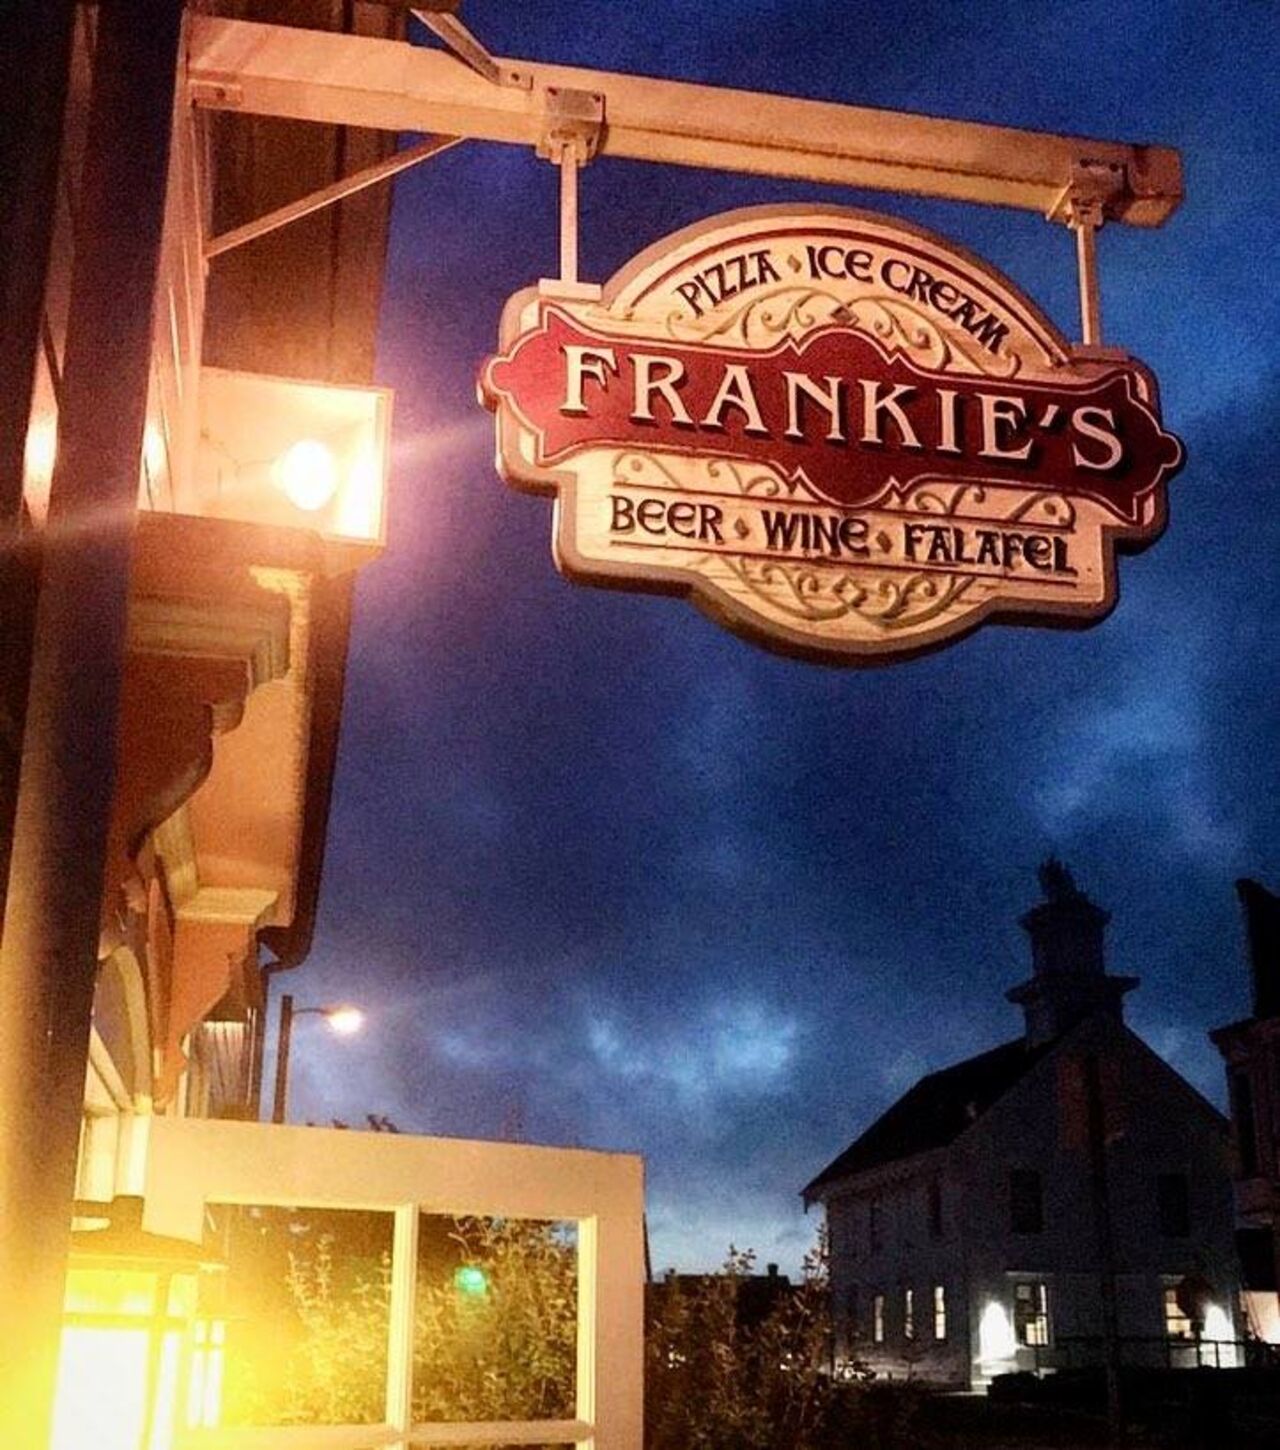 A photo of Frankie's